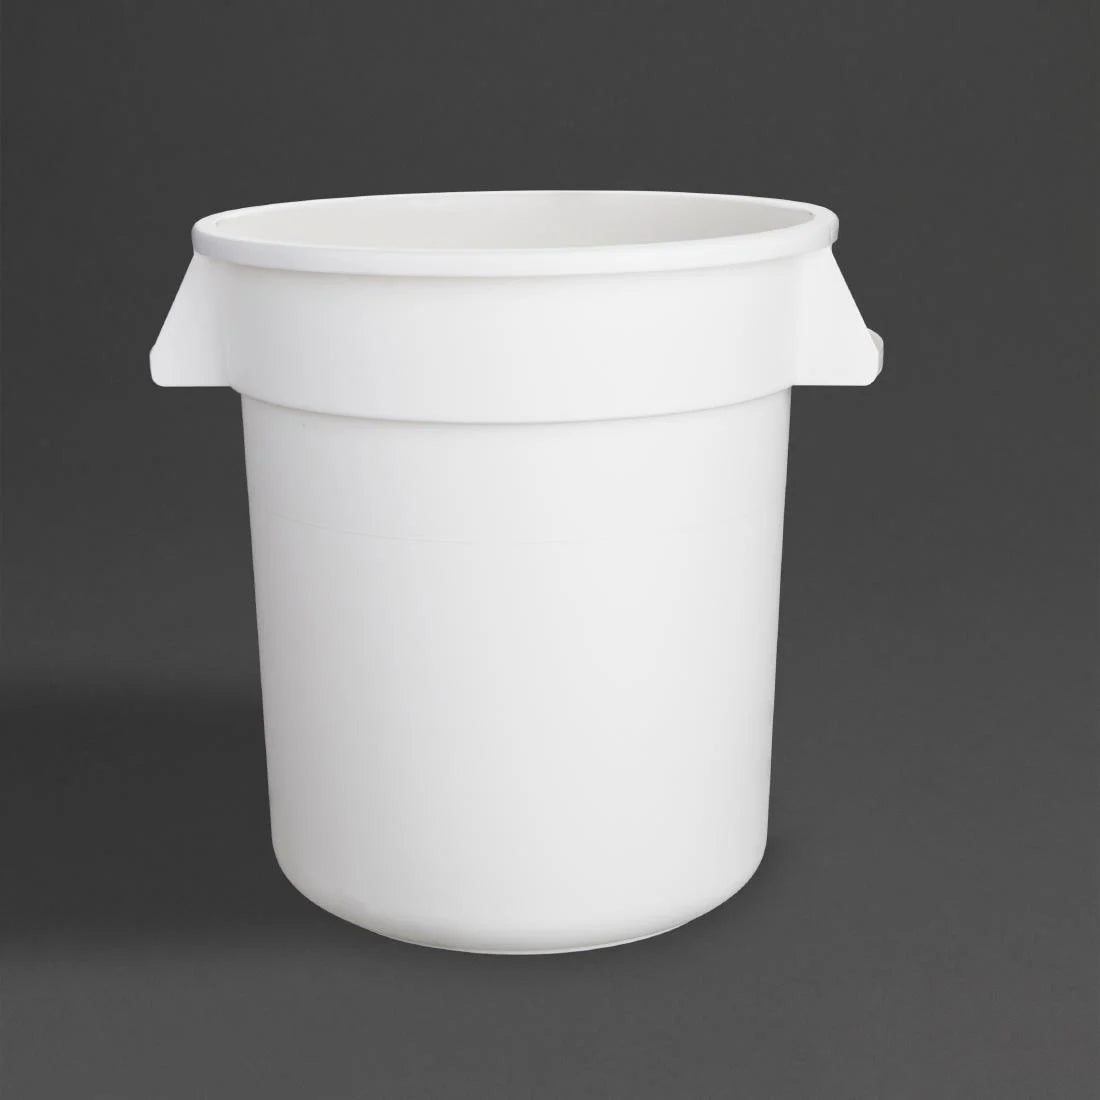 Polypropylene Round Container Bin White 76Ltr.Product Ref:00729.Model:GG793. 🚚 5-7 Days Delivery